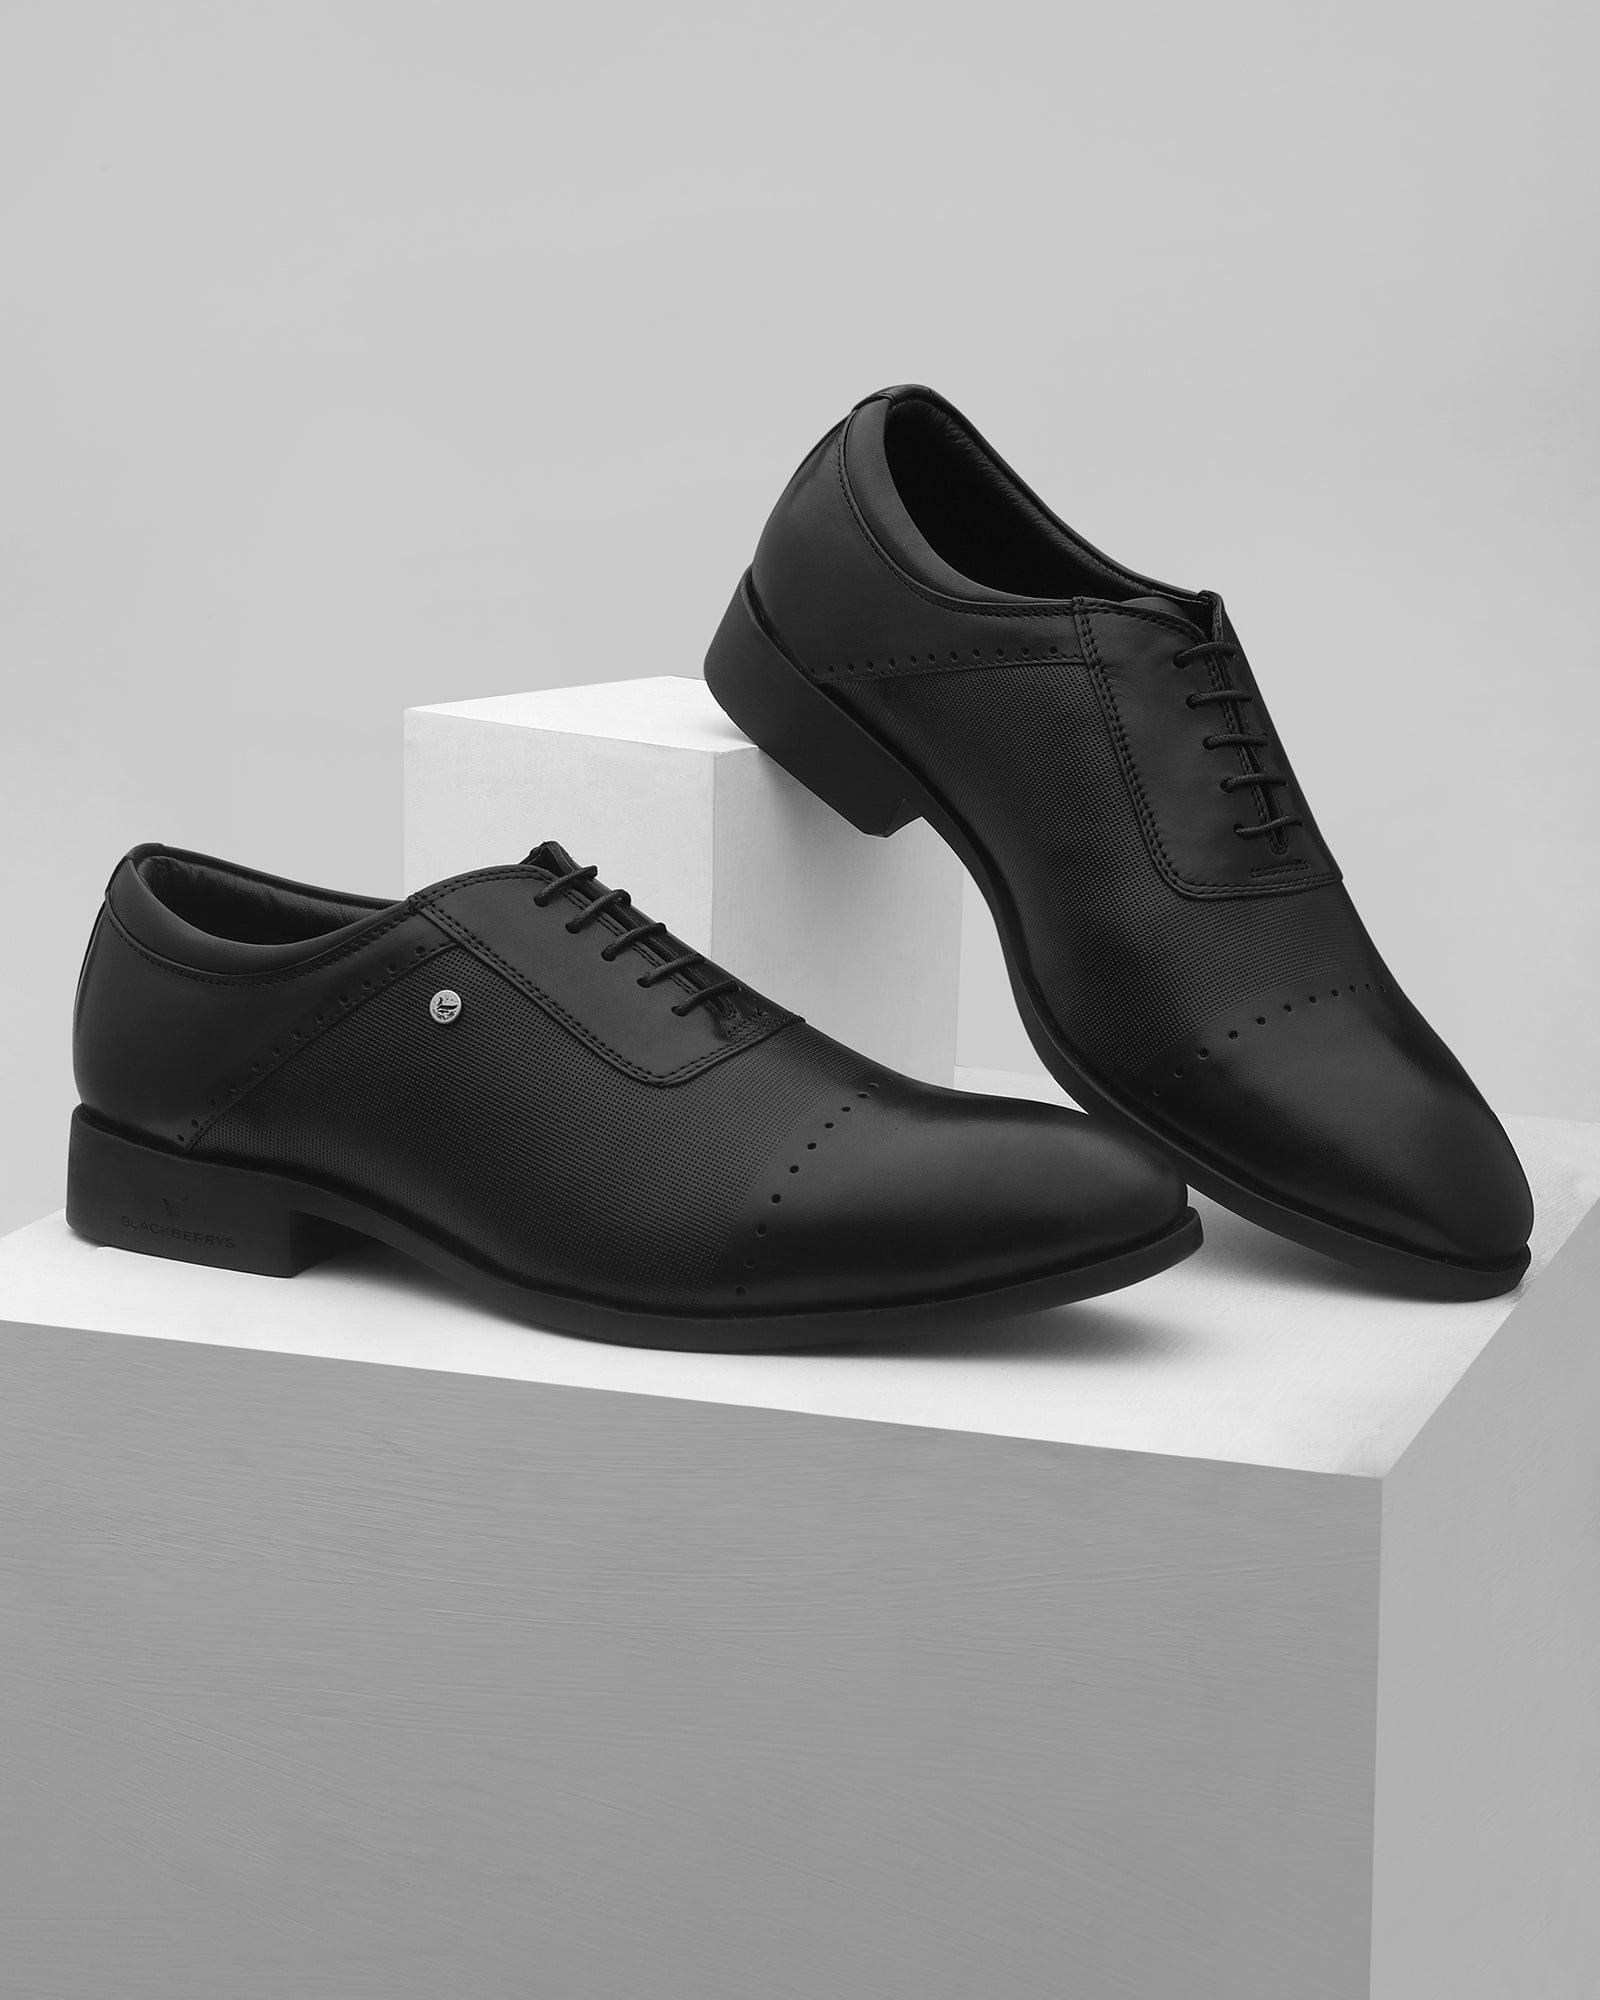 must-haves-leather-black-textured-oxford-shoes---kiwi